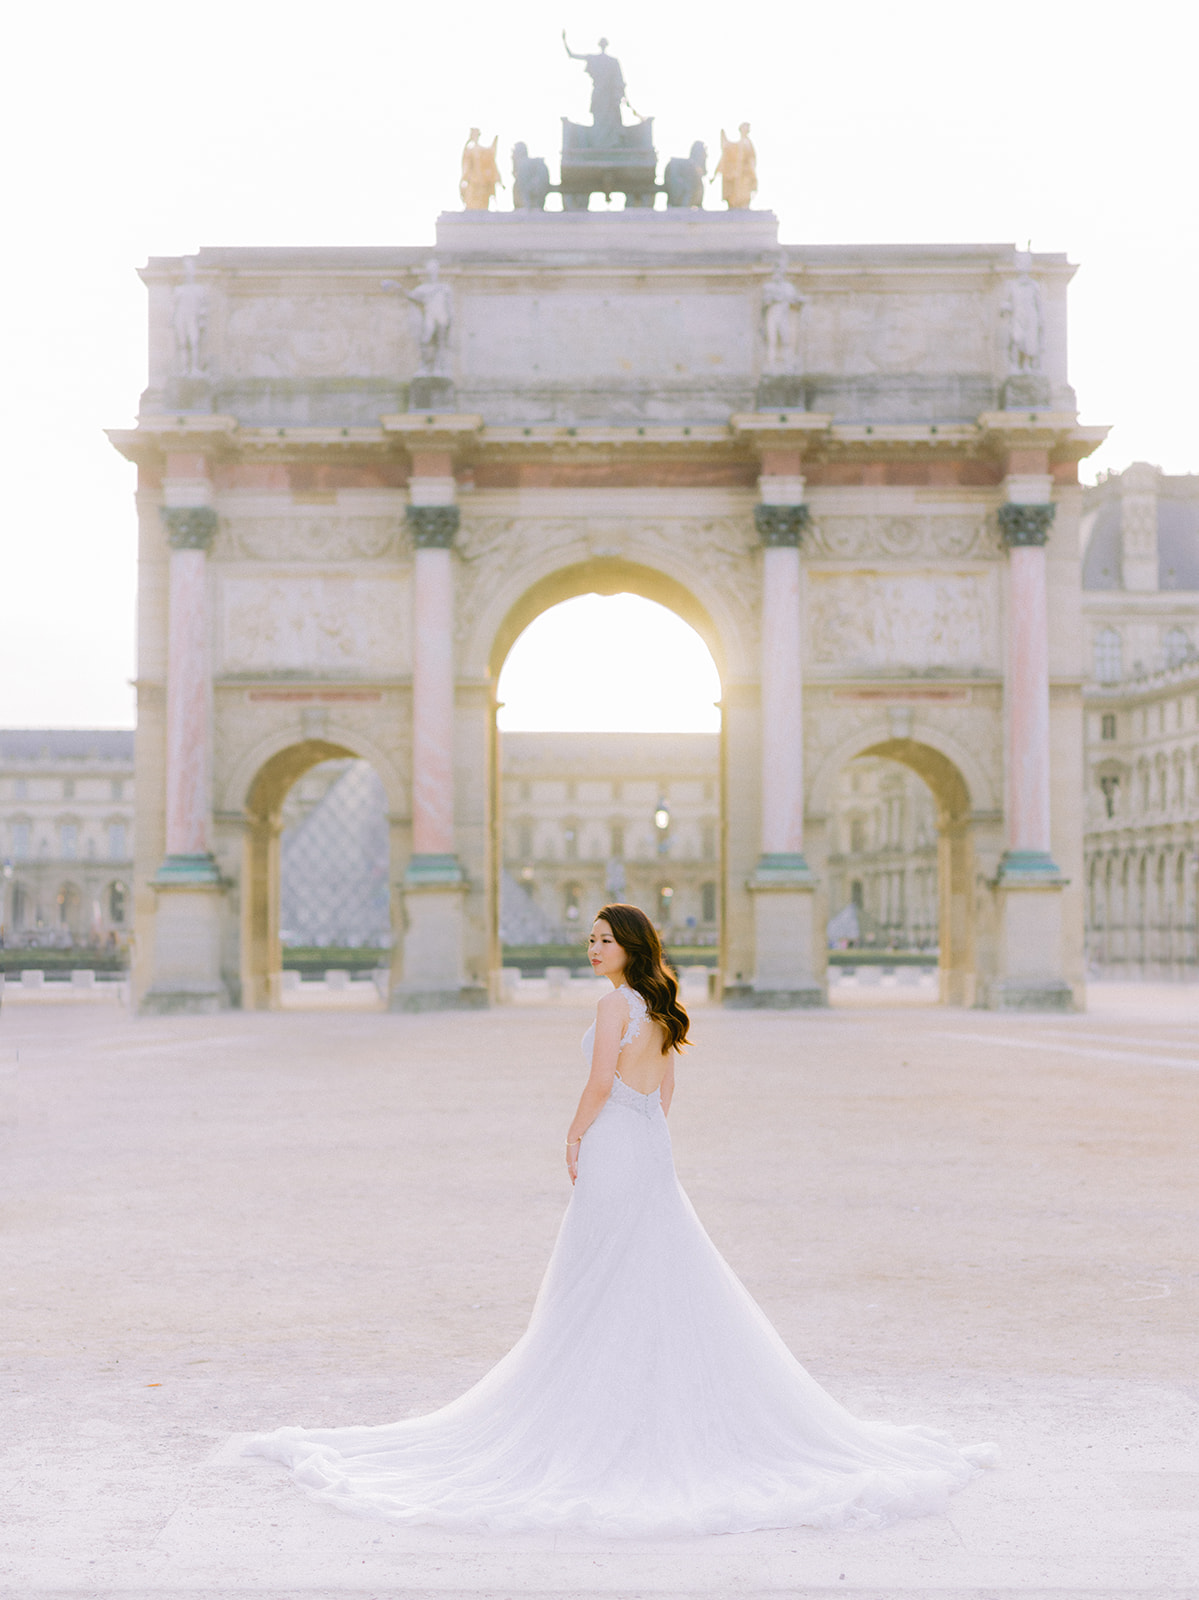 Bride posing in front of an arch 